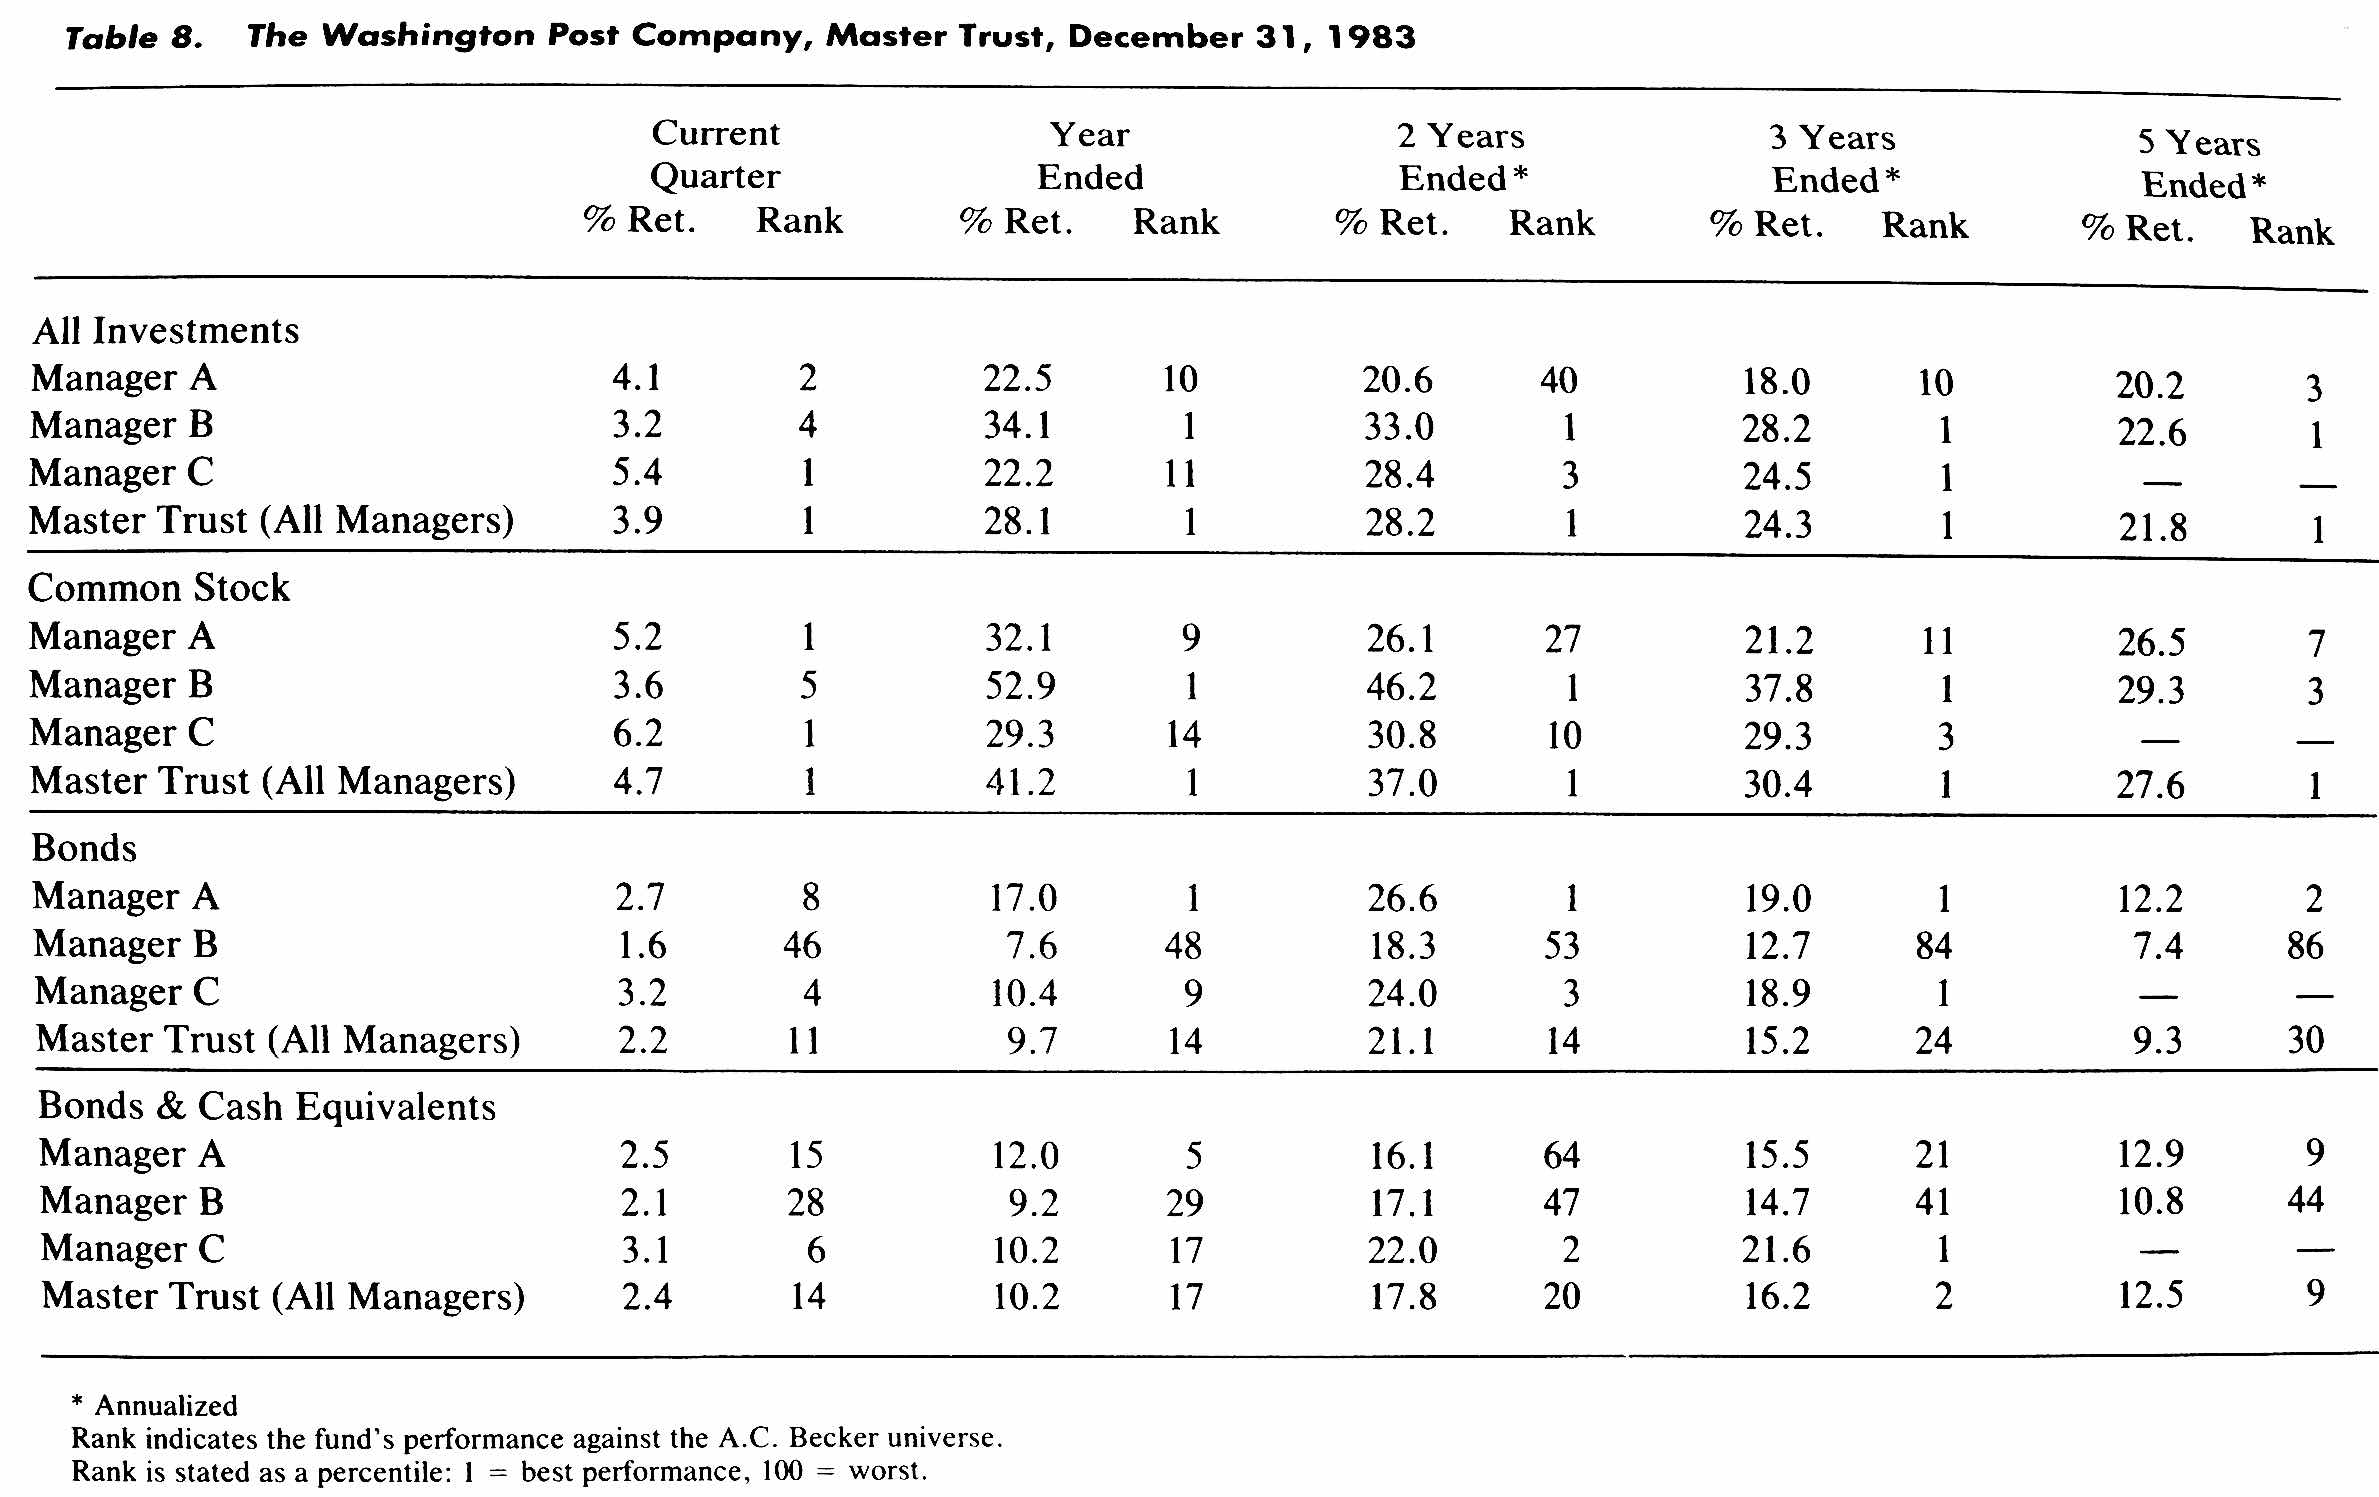 Table 8 The Washington Post Company Master Trust Dec 31 1983 from The Intelligent Investor by Benjamin Graham